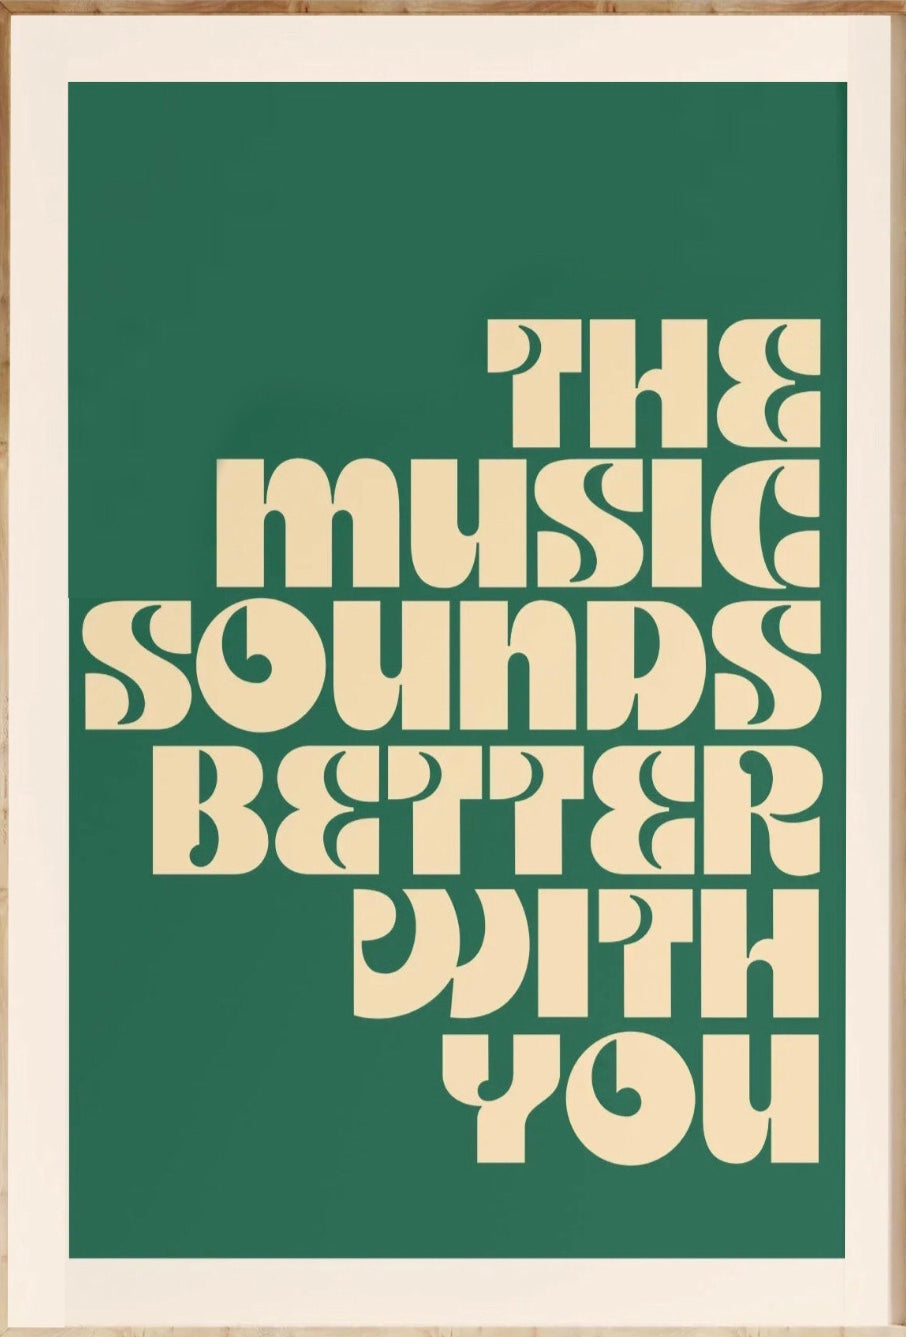 "the music sounds better with you" poster